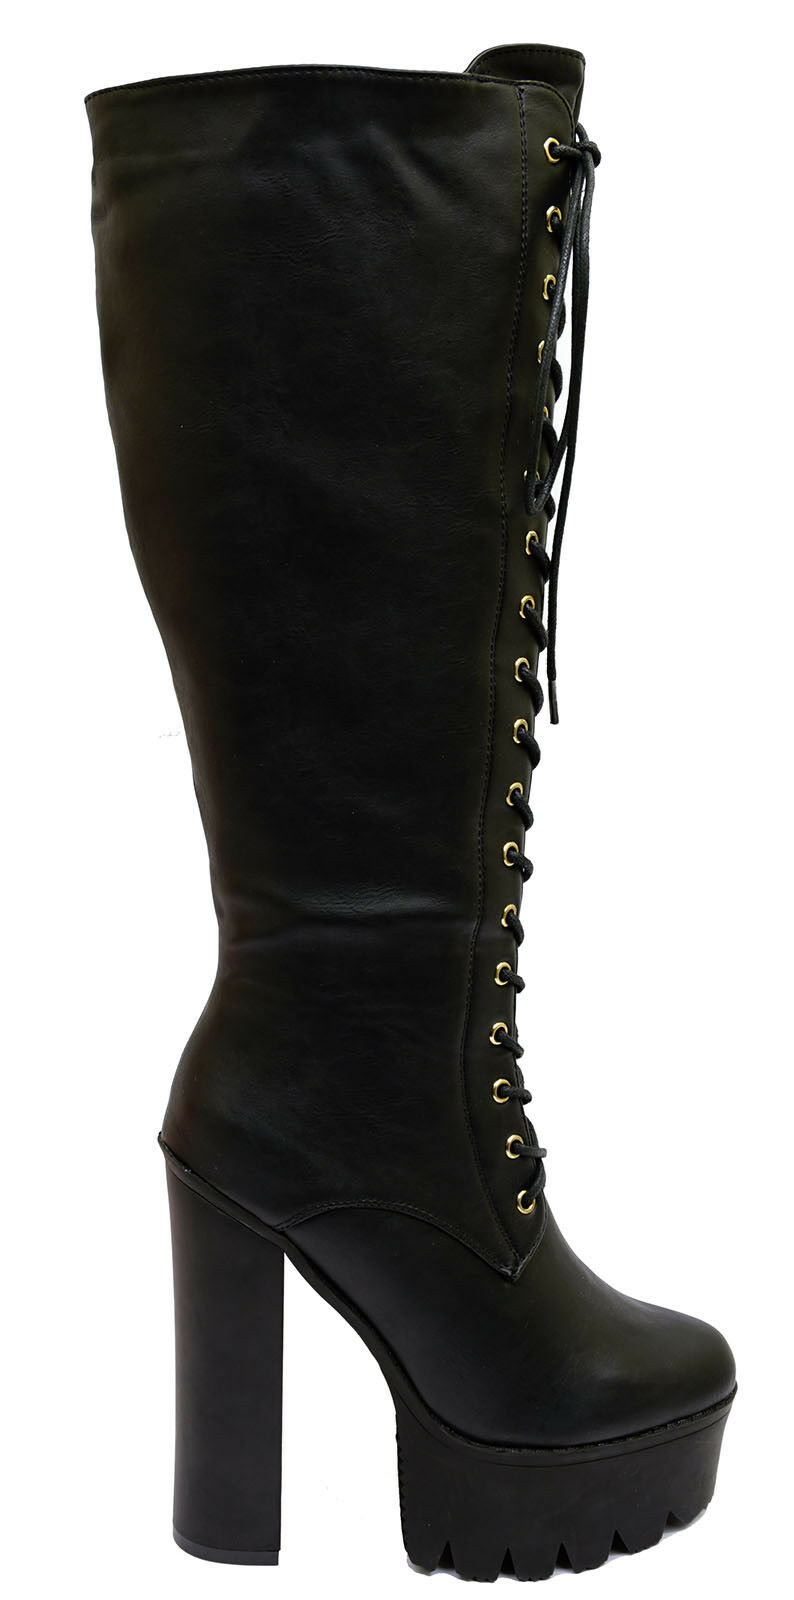 LADIES BLACK KNEE-HIGH ZIP-UP CHUNKY EXOTIC PLATFORM TALL BOOTS SHOES SIZES 4-9 | eBay